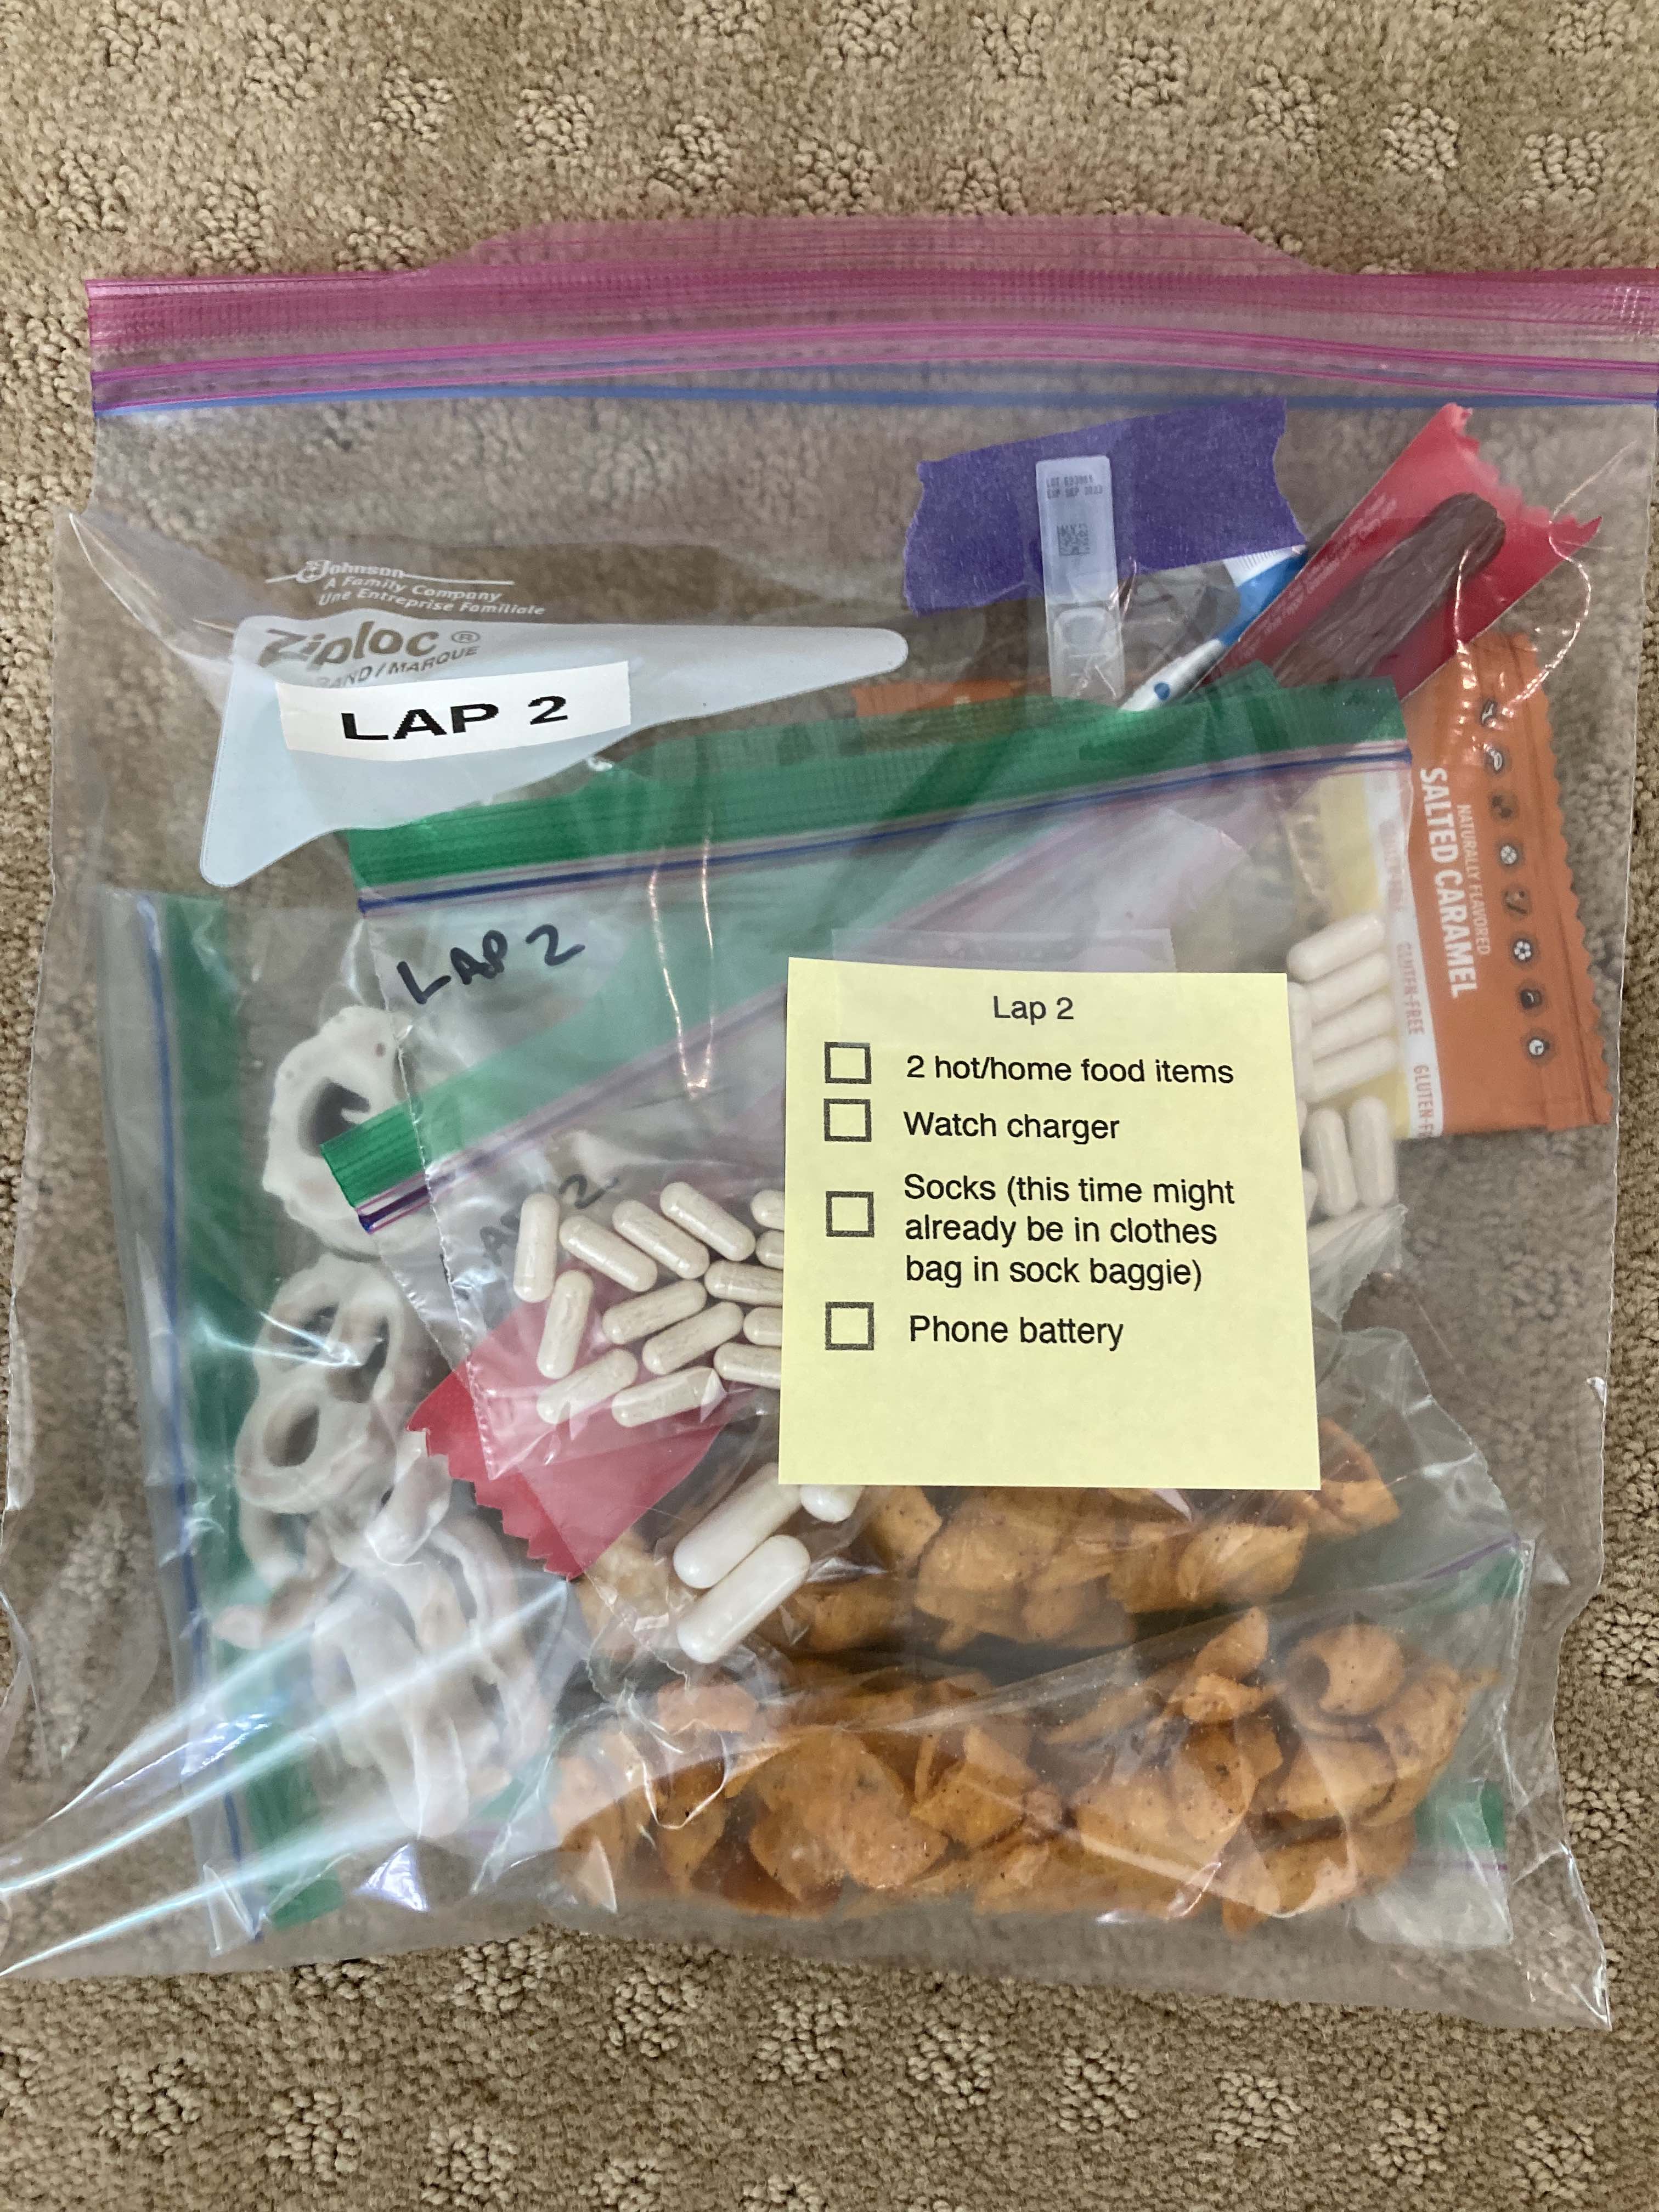 A gallon bag containing the enzymes, electrolytes, and snacks for each lap of my ultramarathon. Atop the bag is a printed sticky note with reminders of other fresh supplies my husband will bring each time.